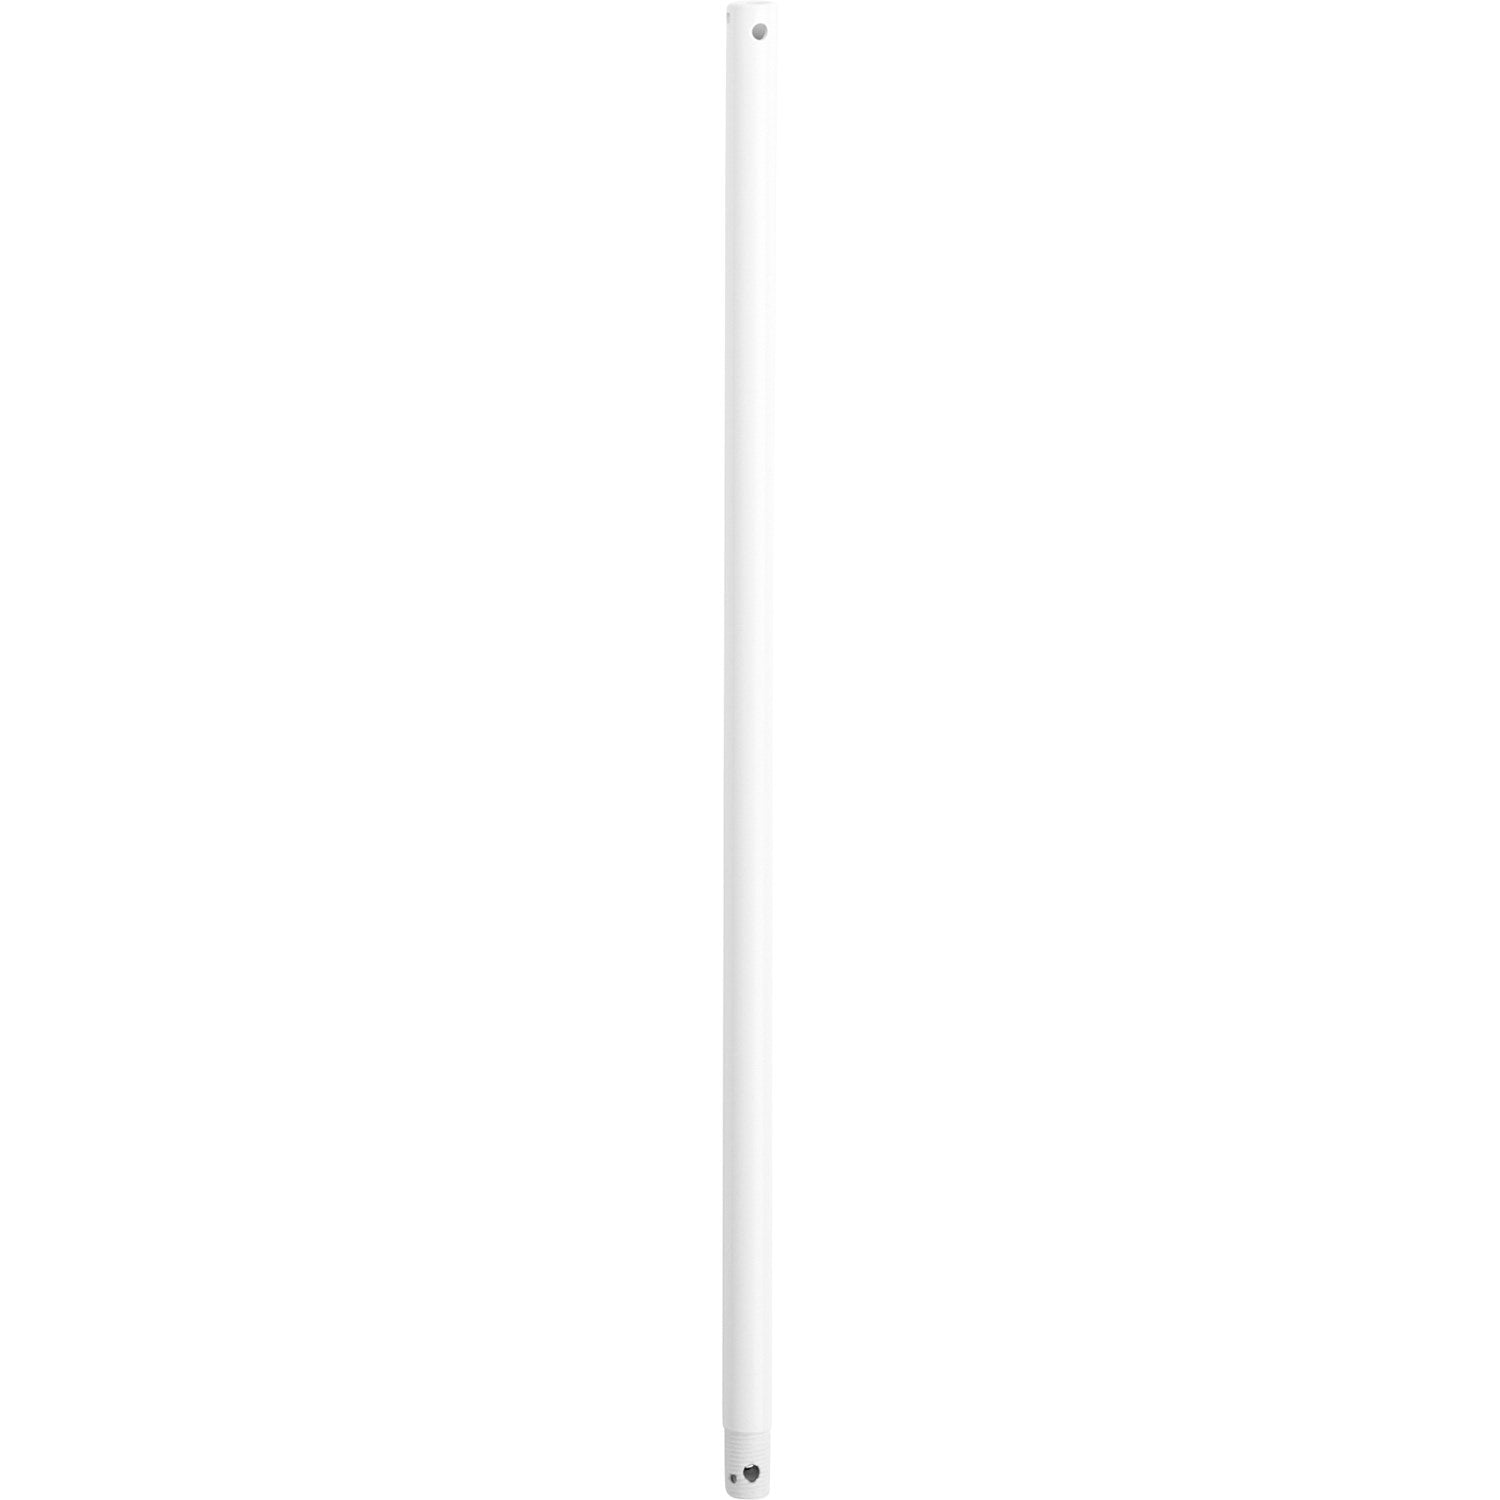 Quorum - 6-246 - Downrod - 24 in. Downrods - White